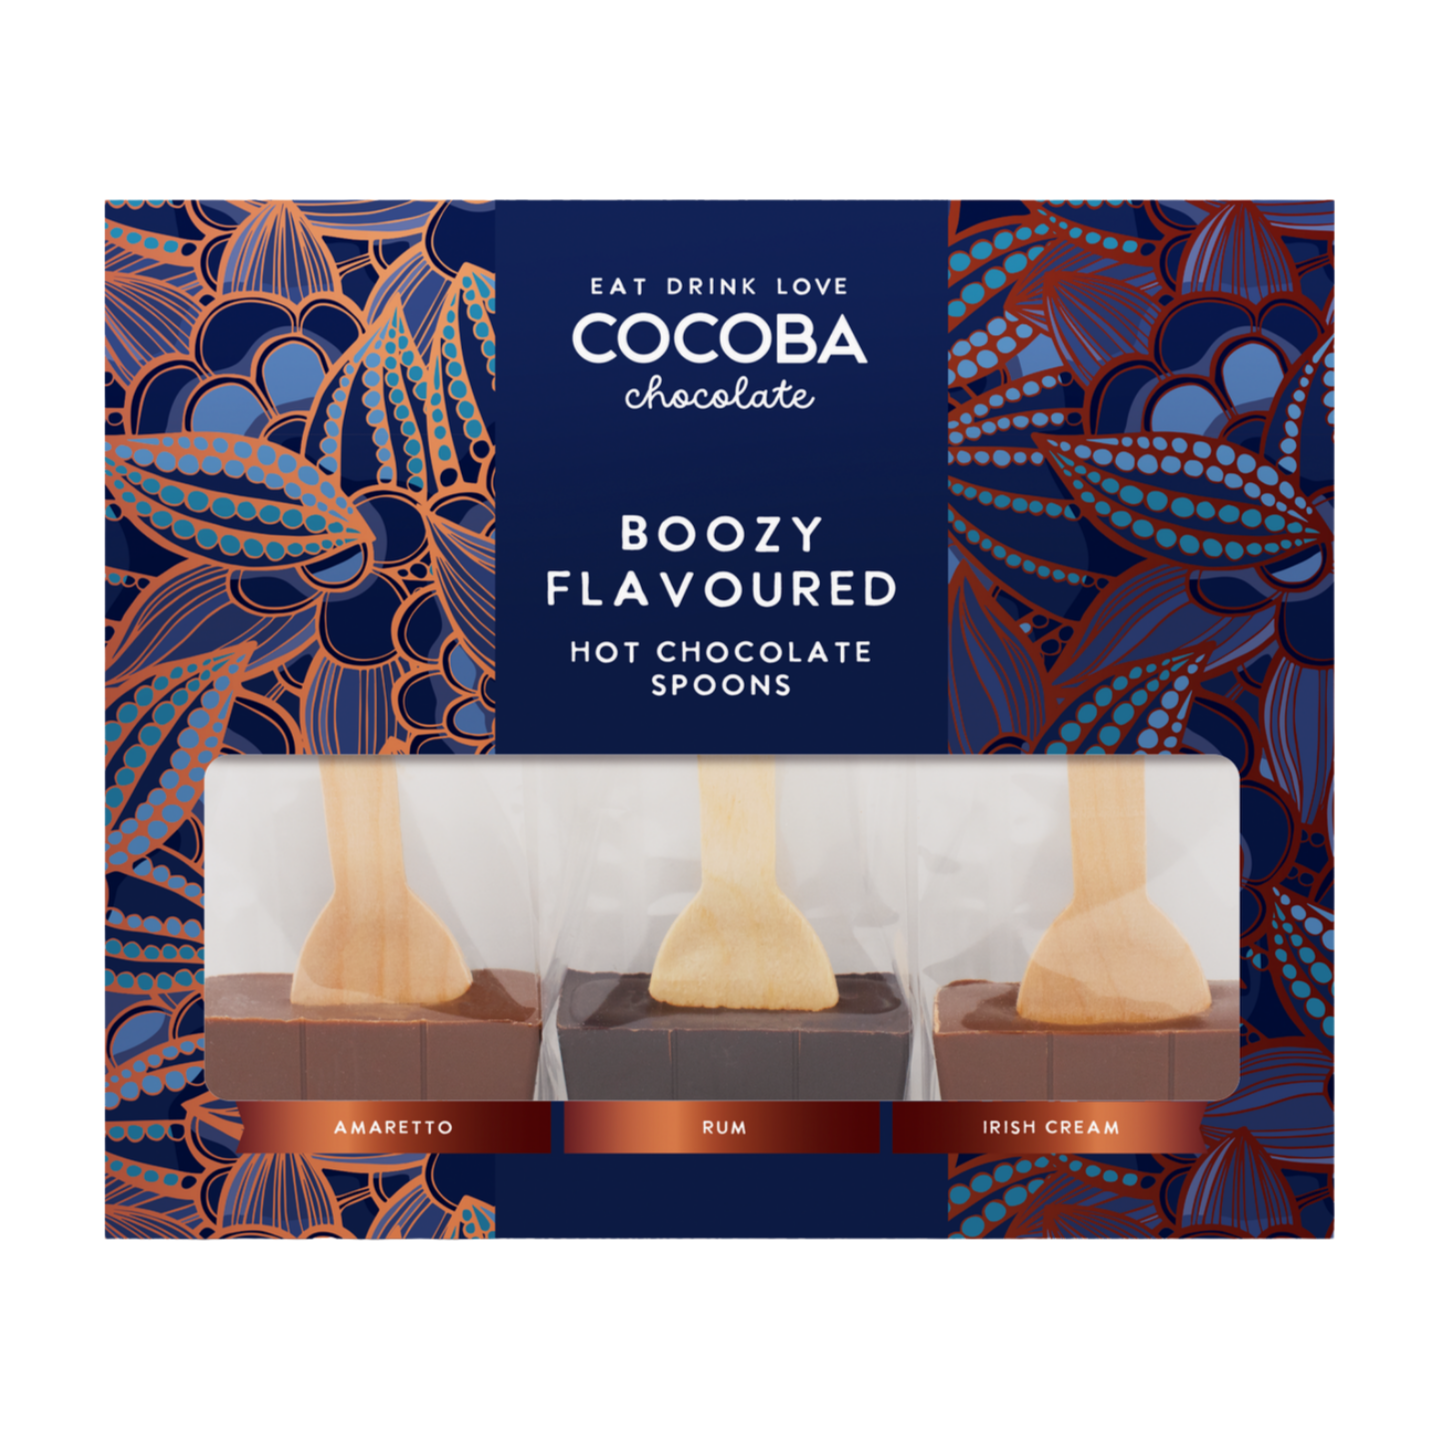 Cocoba Boozy Flavoured Hot Chocolate Spoons (150g)